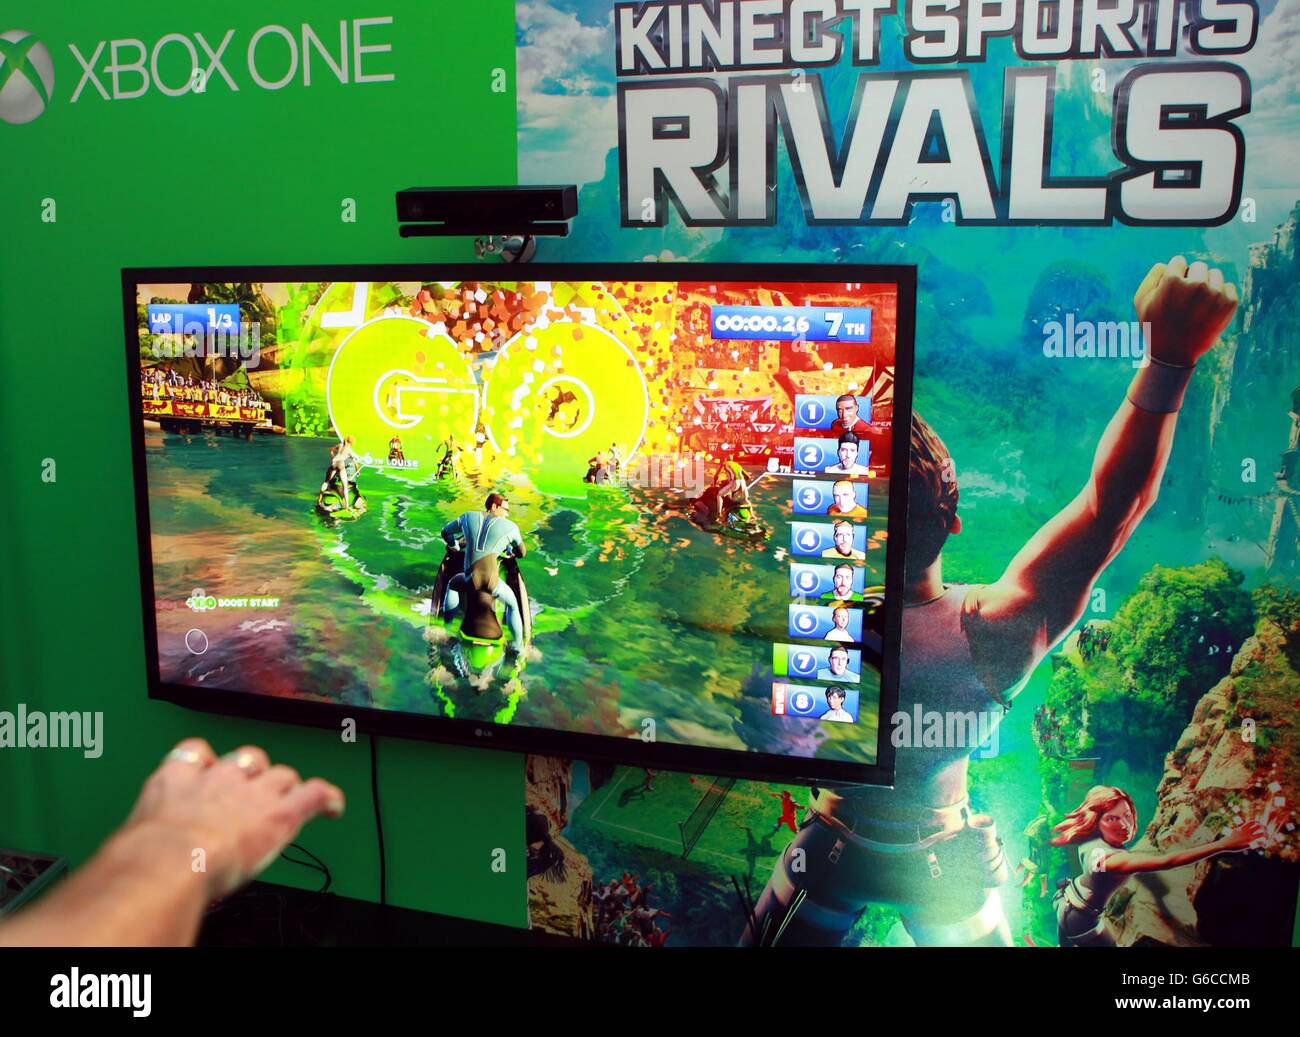 Kinect Sports Rivals - XBOX One